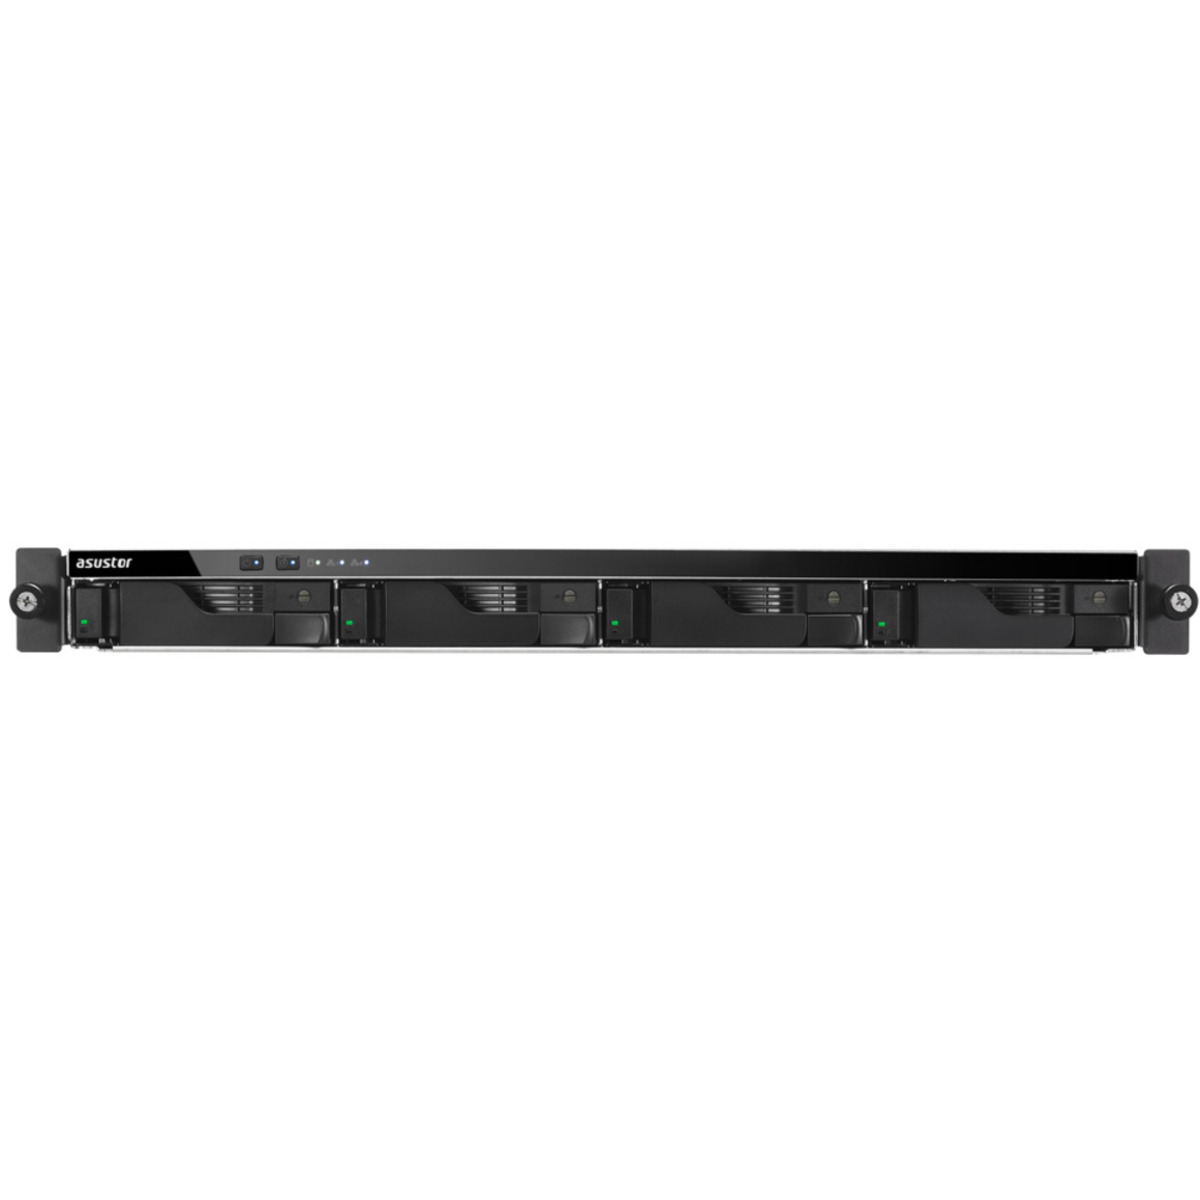 ASUSTOR LOCKERSTOR 4RD AS6504RD 66tb 4-Bay RackMount Multimedia / Power User / Business NAS - Network Attached Storage Device 3x22tb Western Digital Ultrastar HC570 WUH722222ALE6L4 3.5 7200rpm SATA 6Gb/s HDD ENTERPRISE Class Drives Installed - Burn-In Tested - FREE RAM UPGRADE LOCKERSTOR 4RD AS6504RD